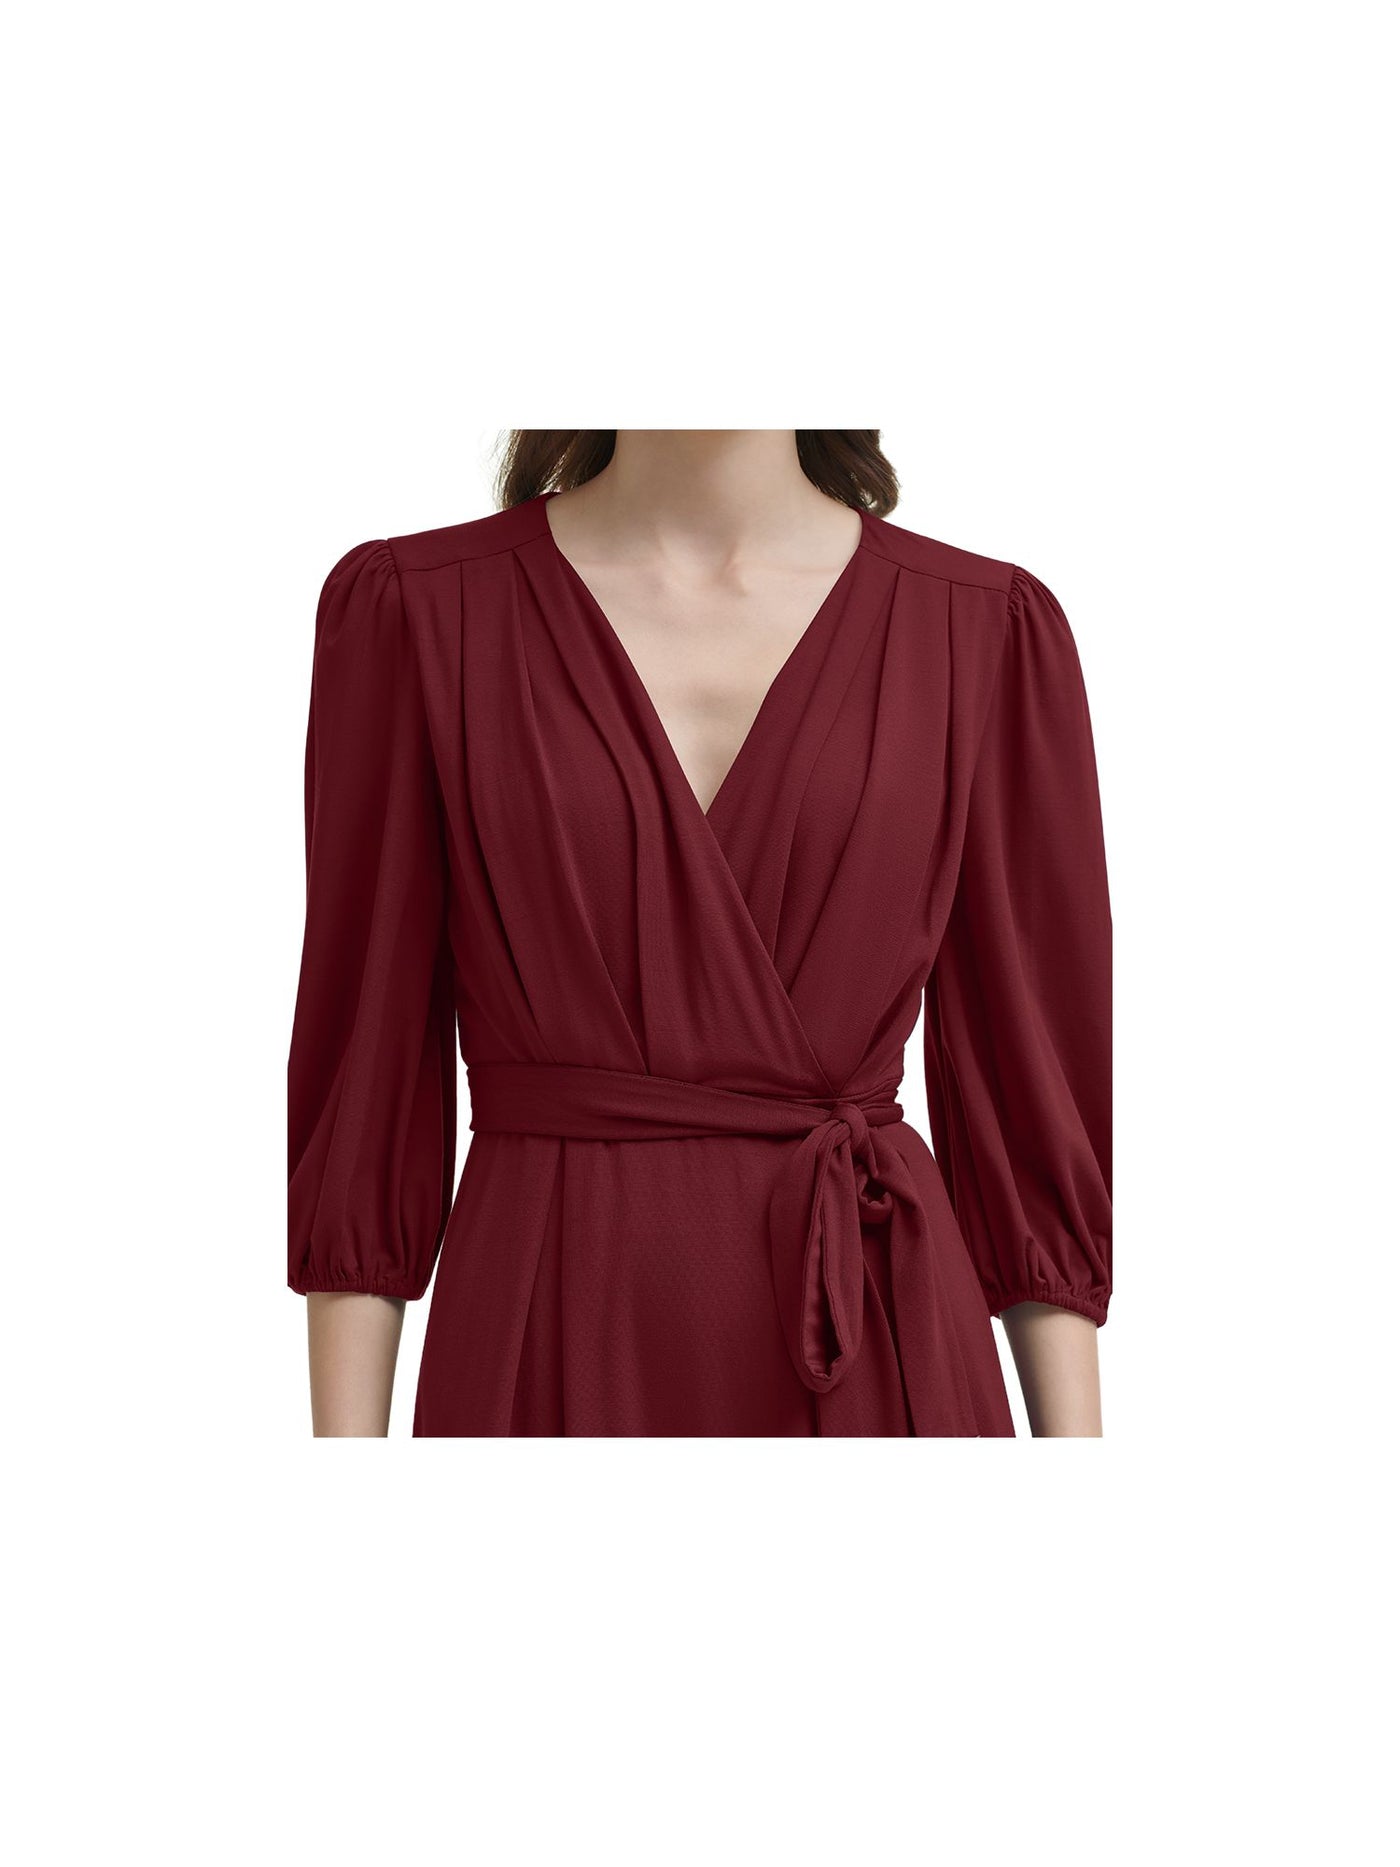 DKNY Womens Zippered Self Tie Belted Waist Lined Elbow Sleeve Surplice Neckline Above The Knee Party Fit + Flare Dress